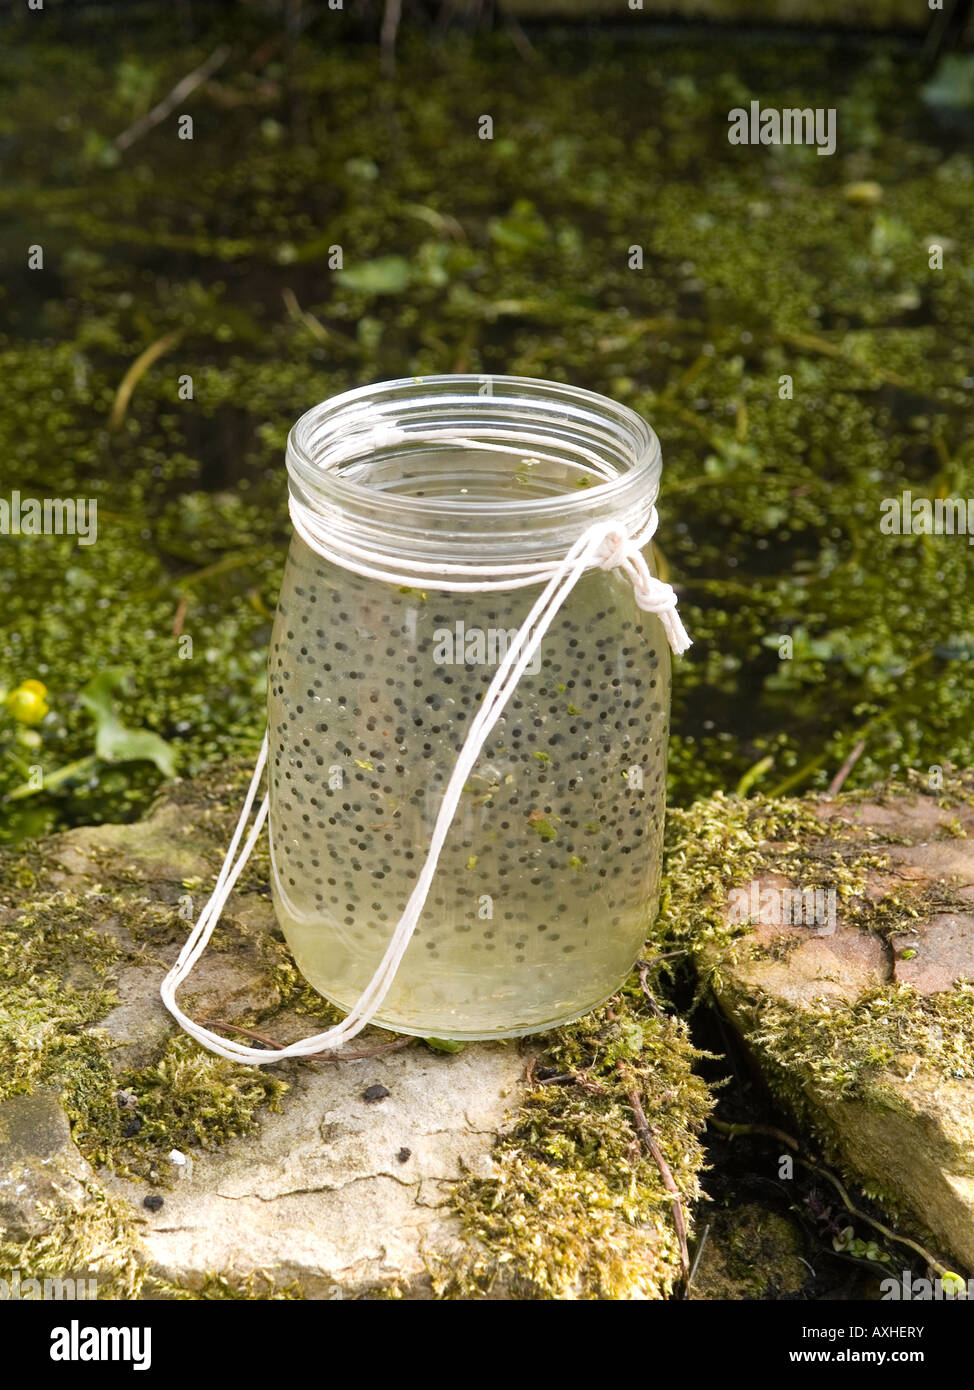 A jar containing frog spawn on the edge of a garden pond Stock Photo - Alamy